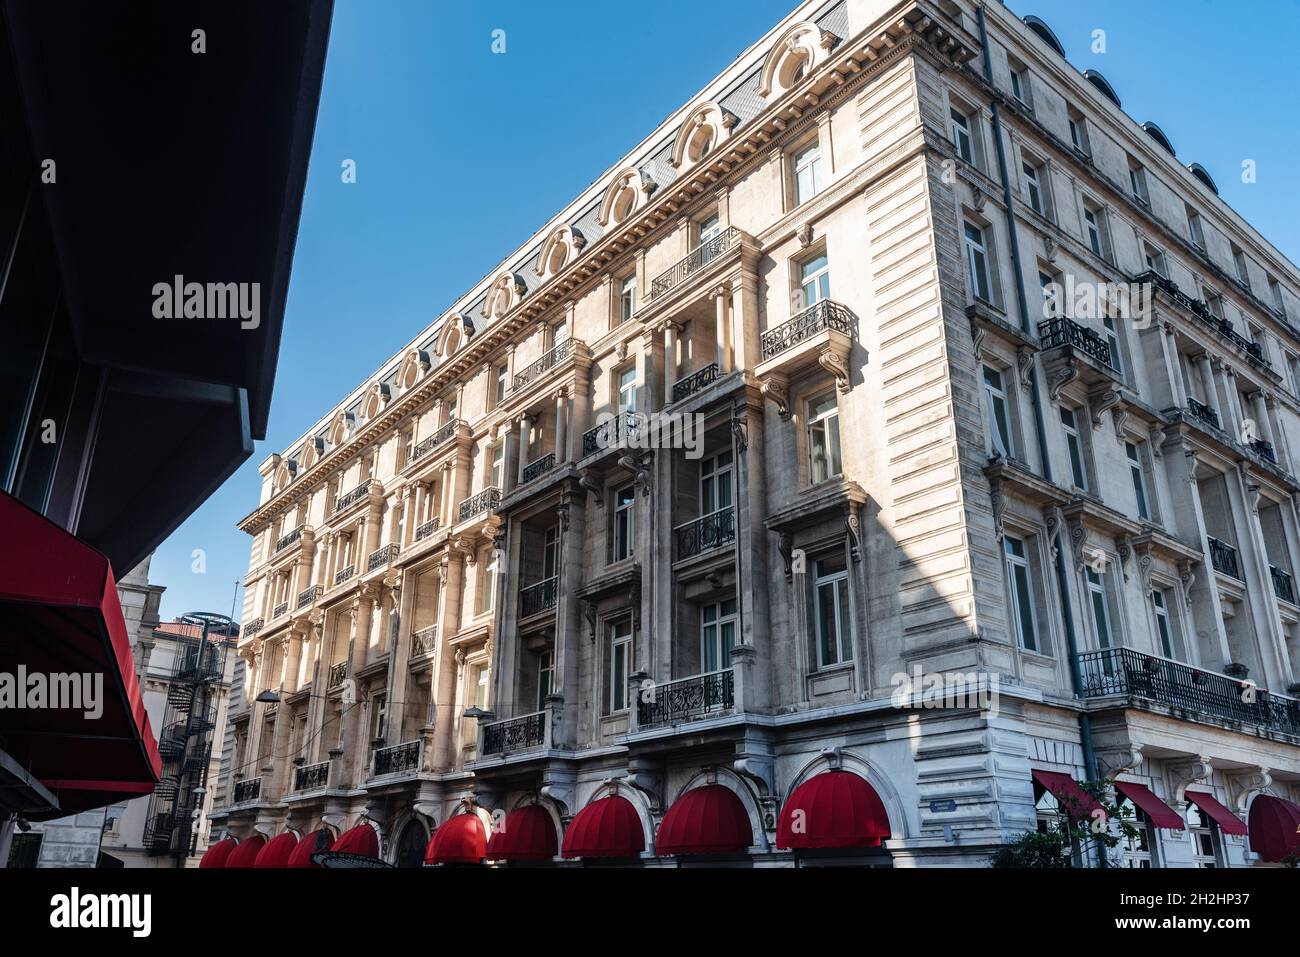 Istanbul, Turkey. October 22nd 2021 The Pera Palace Hotel Famous for Agatha Christie Author of the Murder on the Orient Express and other well know wr Stock Photo